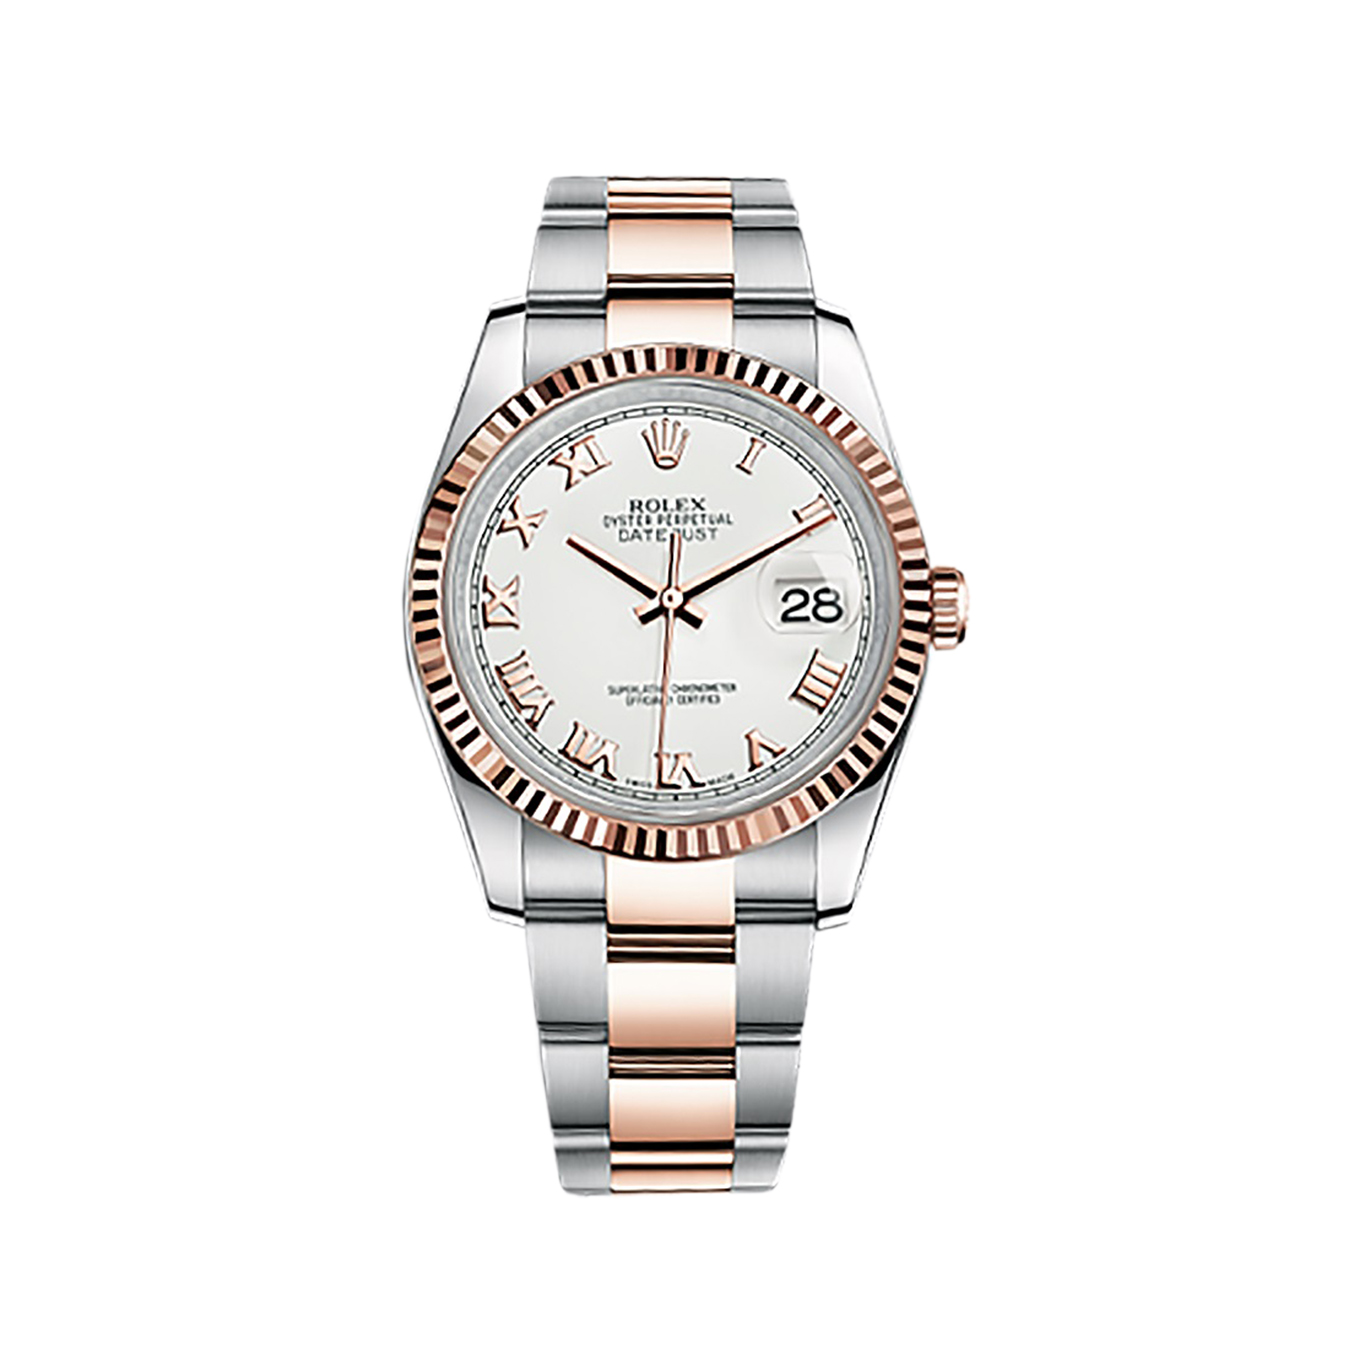 Datejust 36 116231 Rose Gold & Stainless Steel Watch (White)